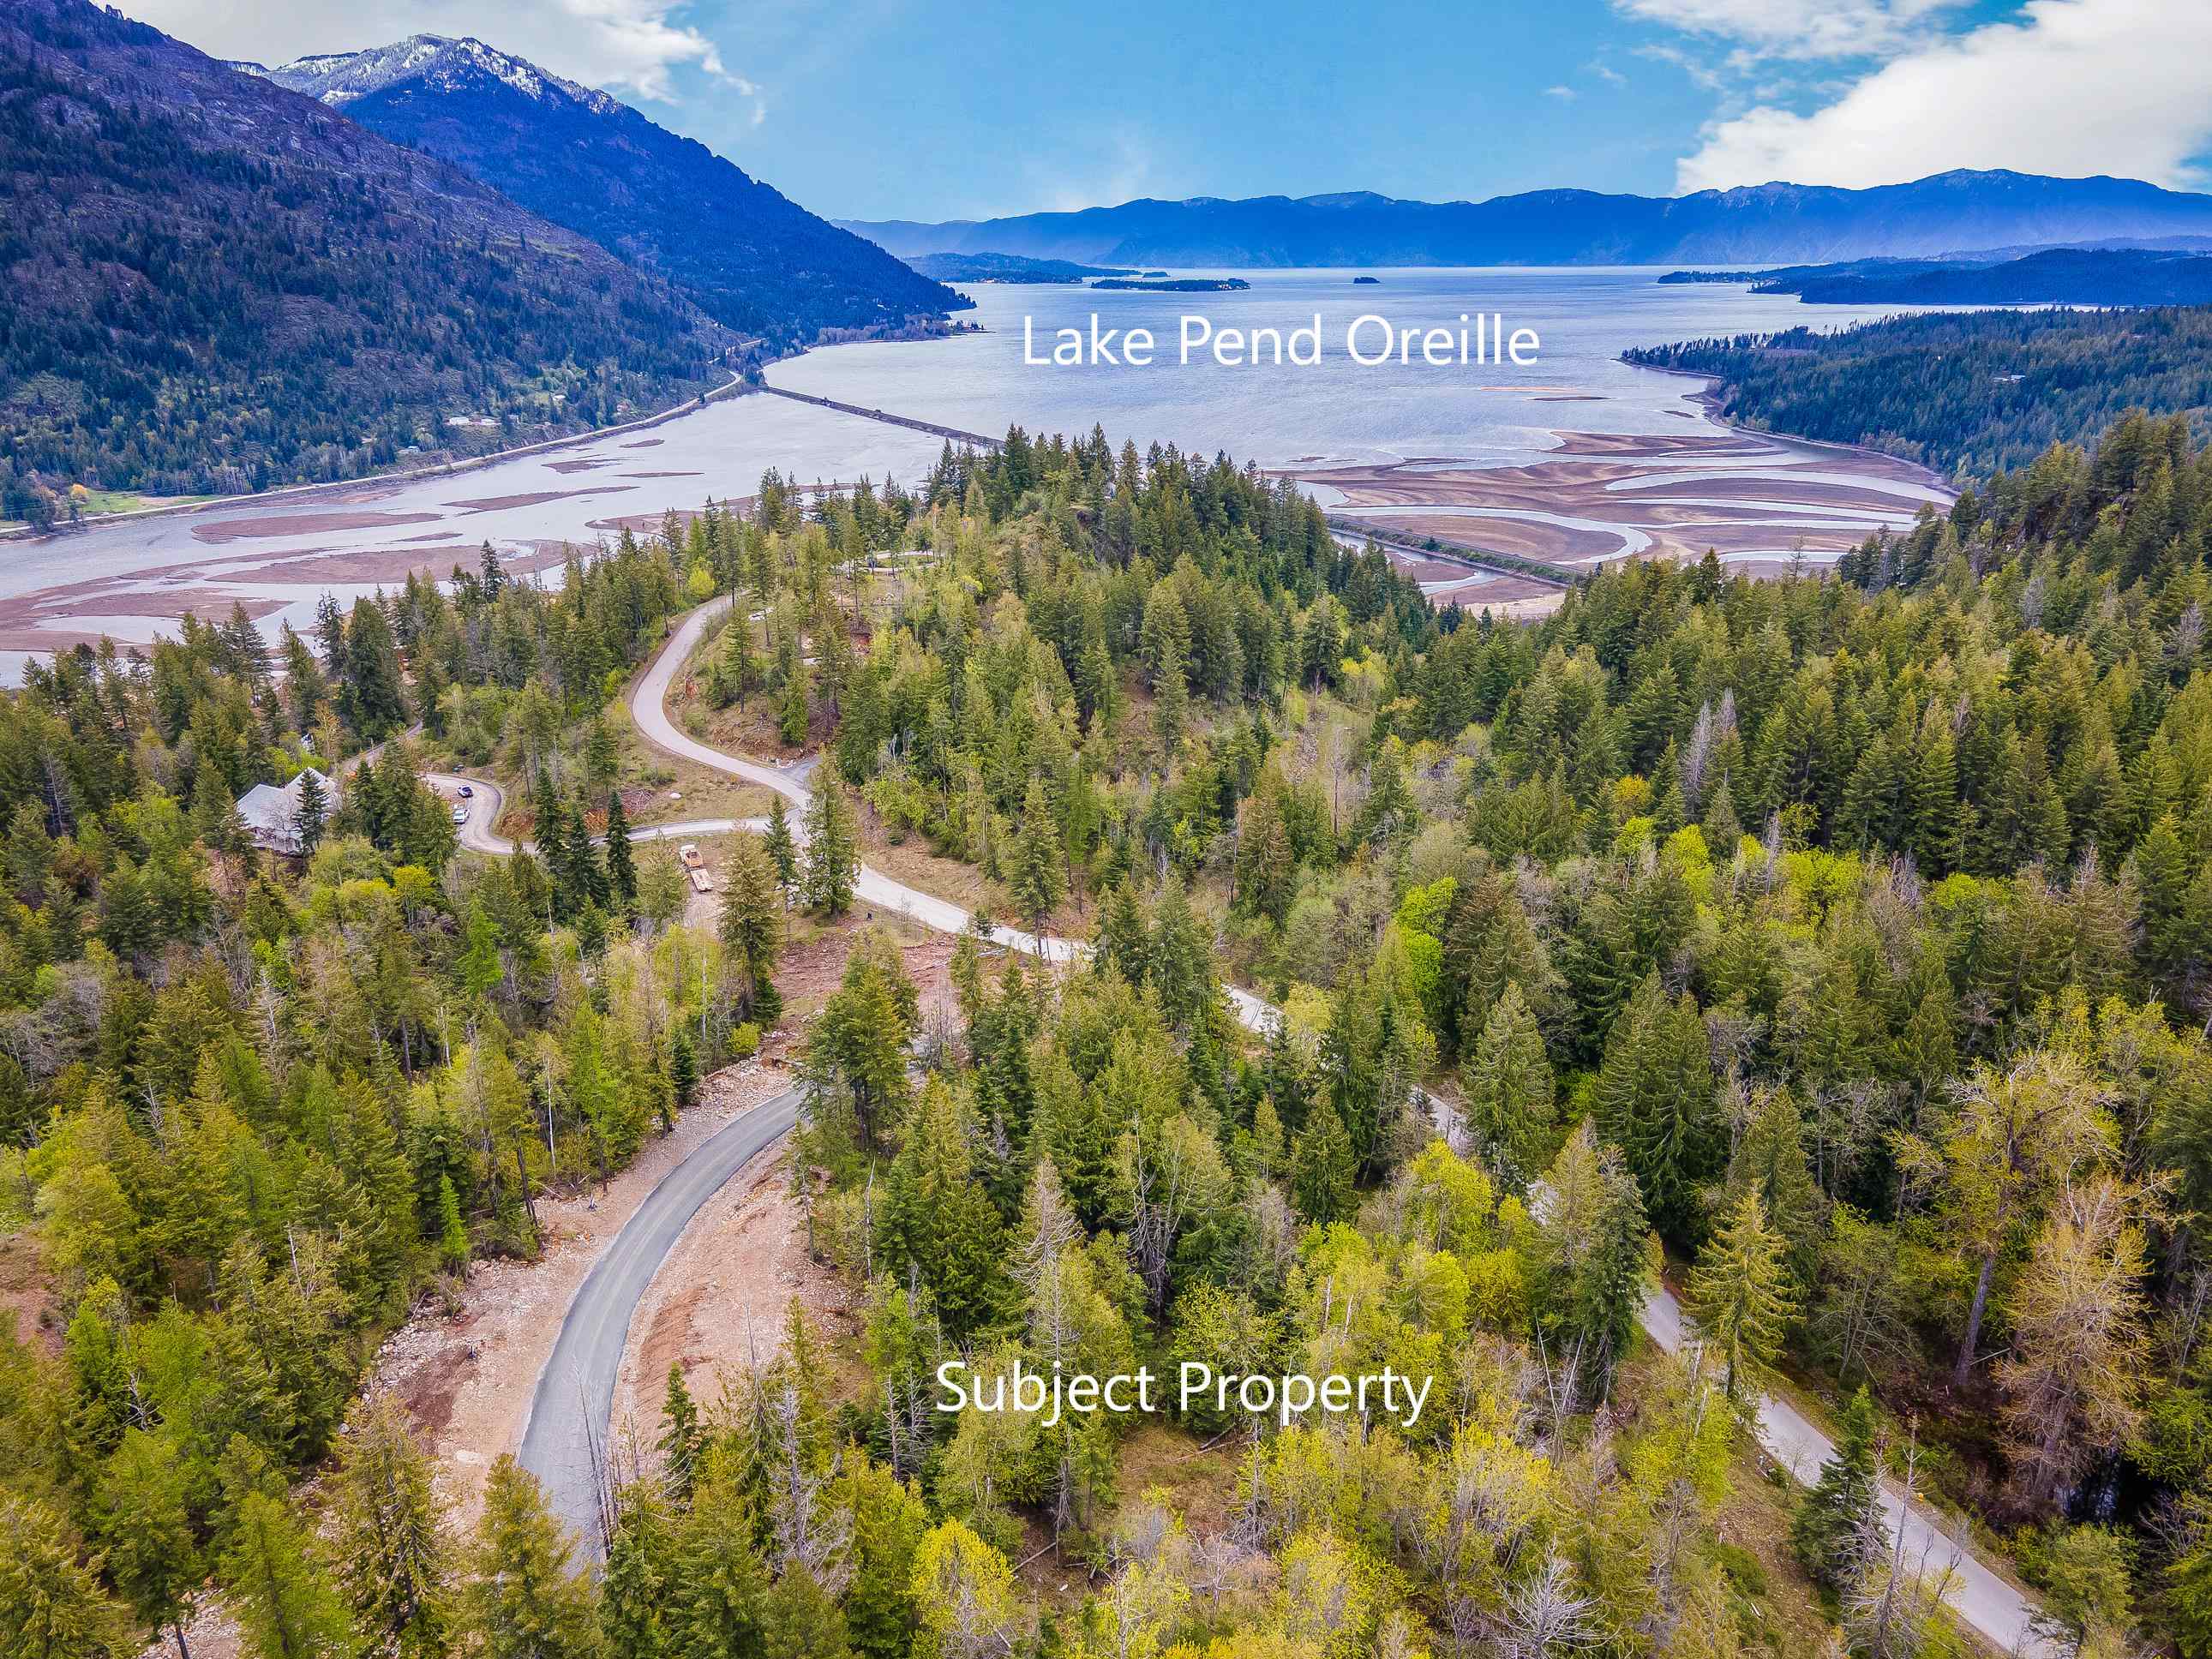 Aerial View with Lake Pend Oreille